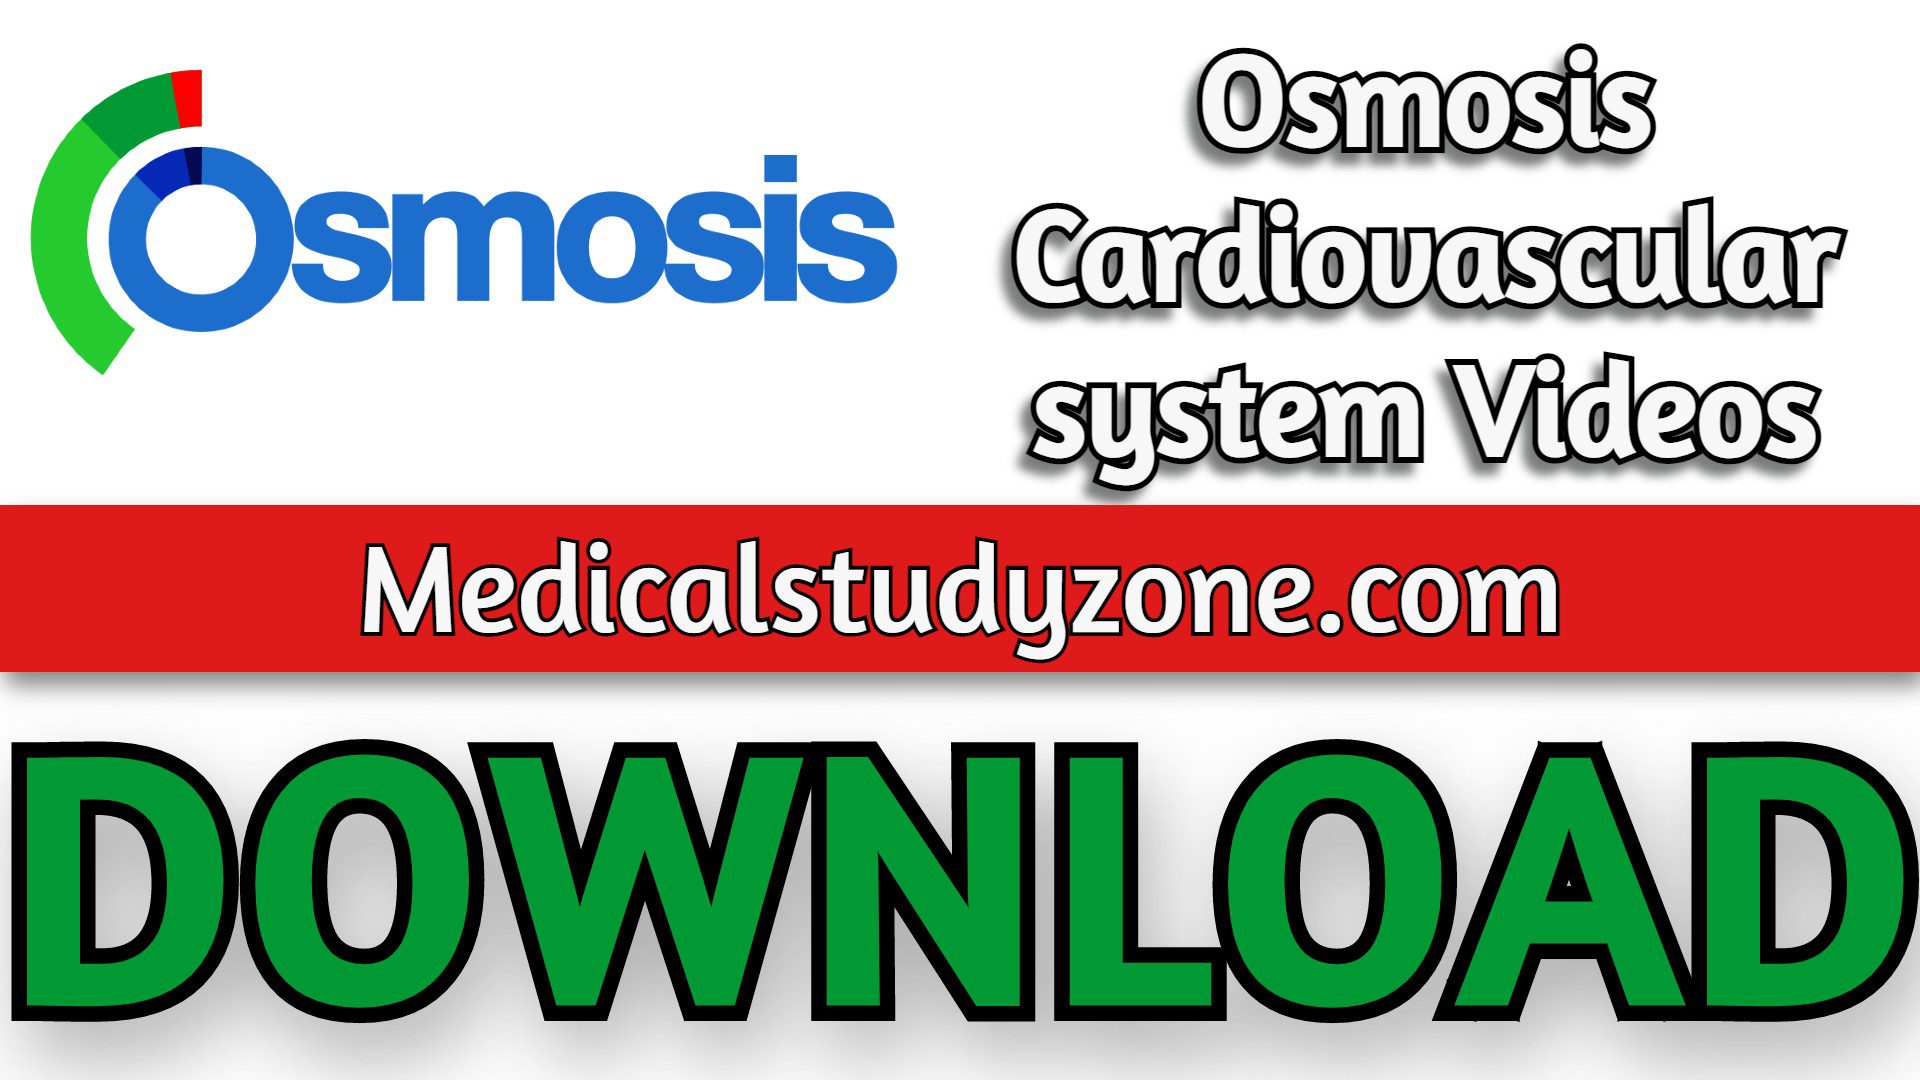 Osmosis Cardiovascular system Videos 2023 Free Download